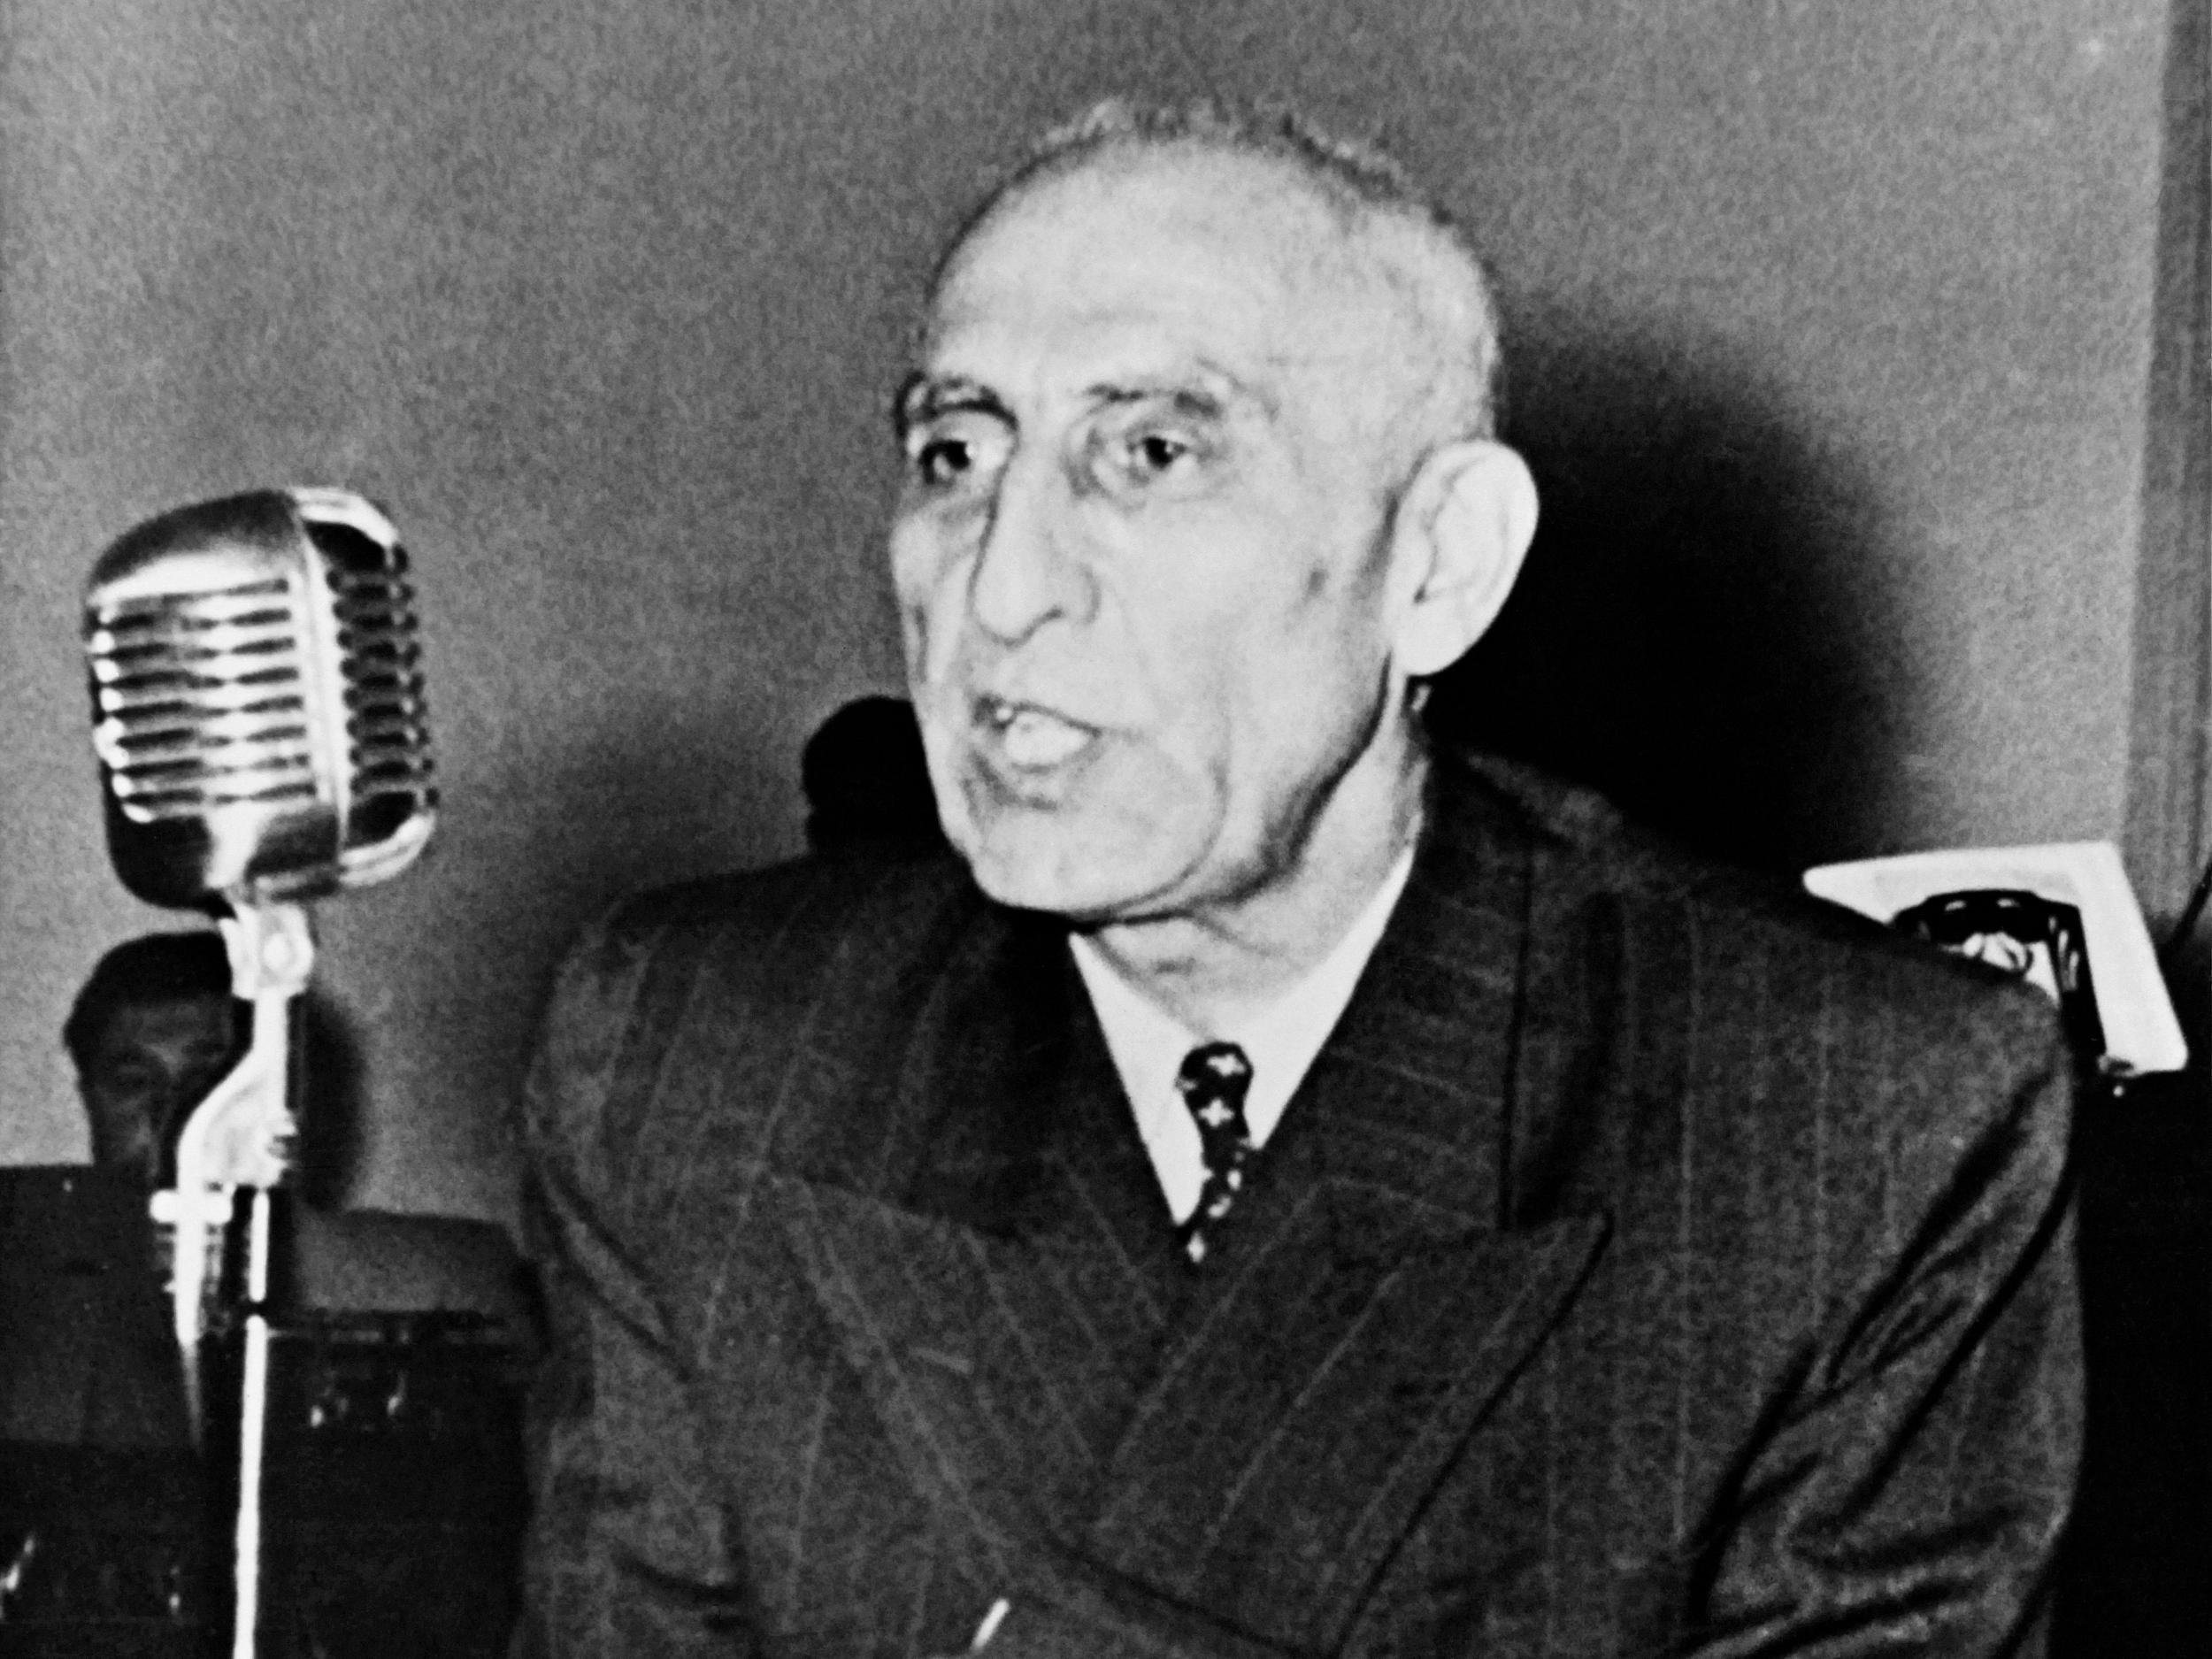 Upon being released from prison, Mohammad Mossadegh spent the rest of his life under house arrest (AFP/Getty)